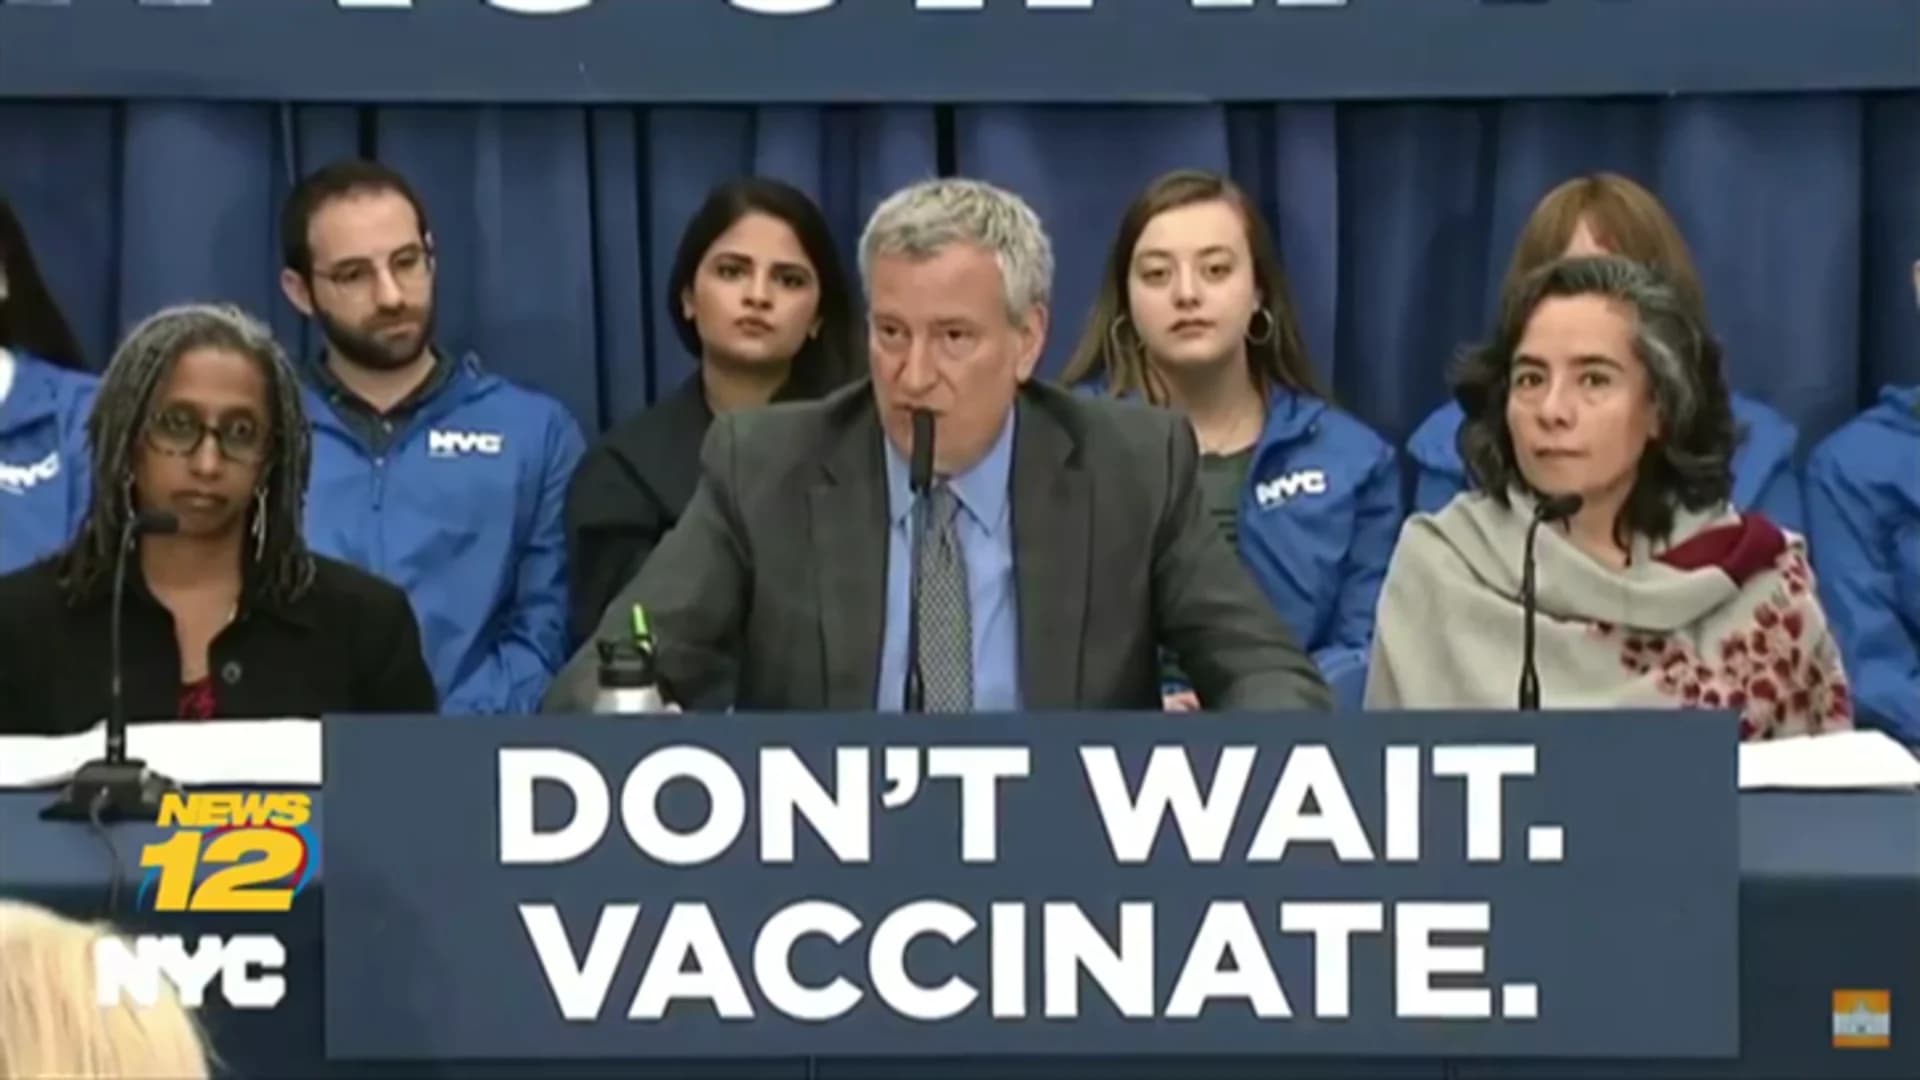 VIDEO: Mayor de Blasio gives update on city's response to measles outbreak